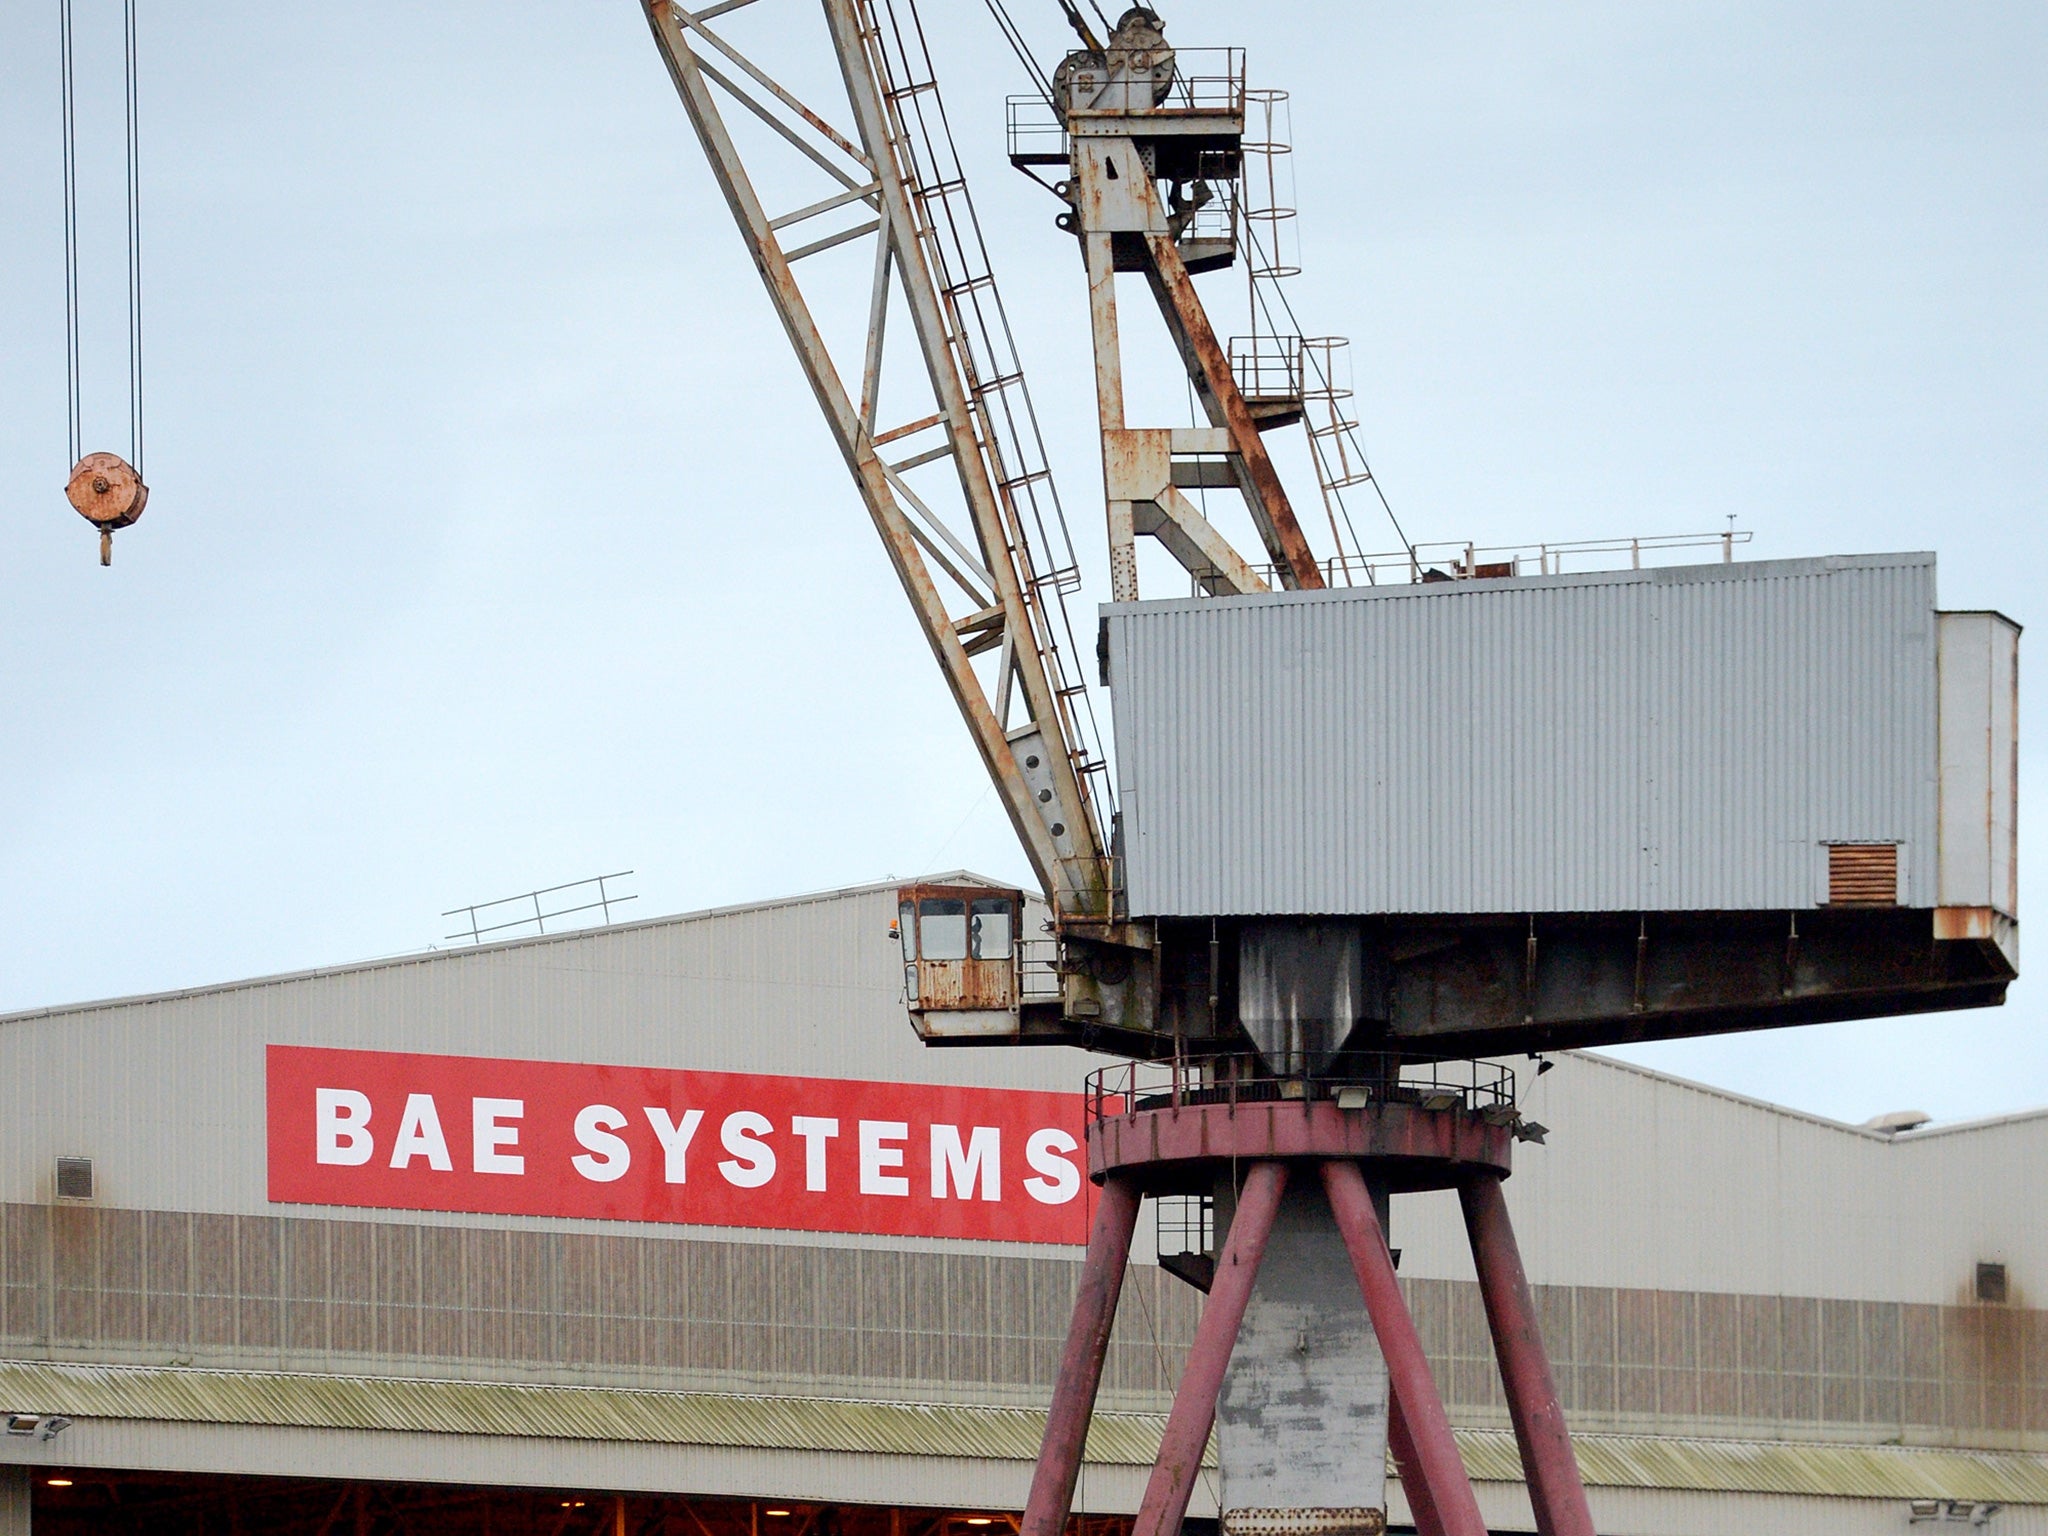 Despite concerns about the defence sector, BAE Systems has performed well